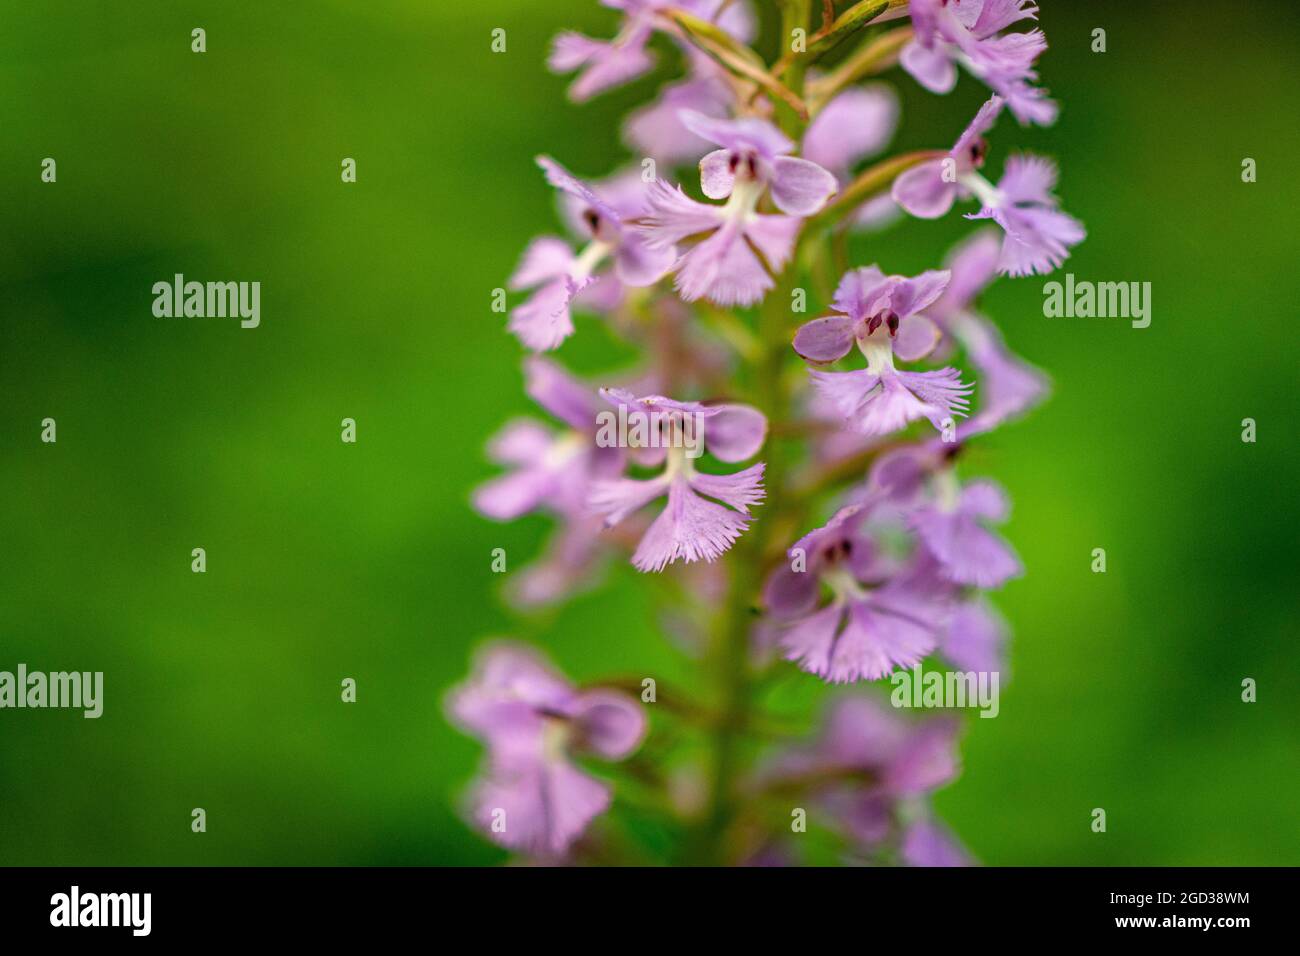 Purple fringed orchid flower close-up Stock Photo